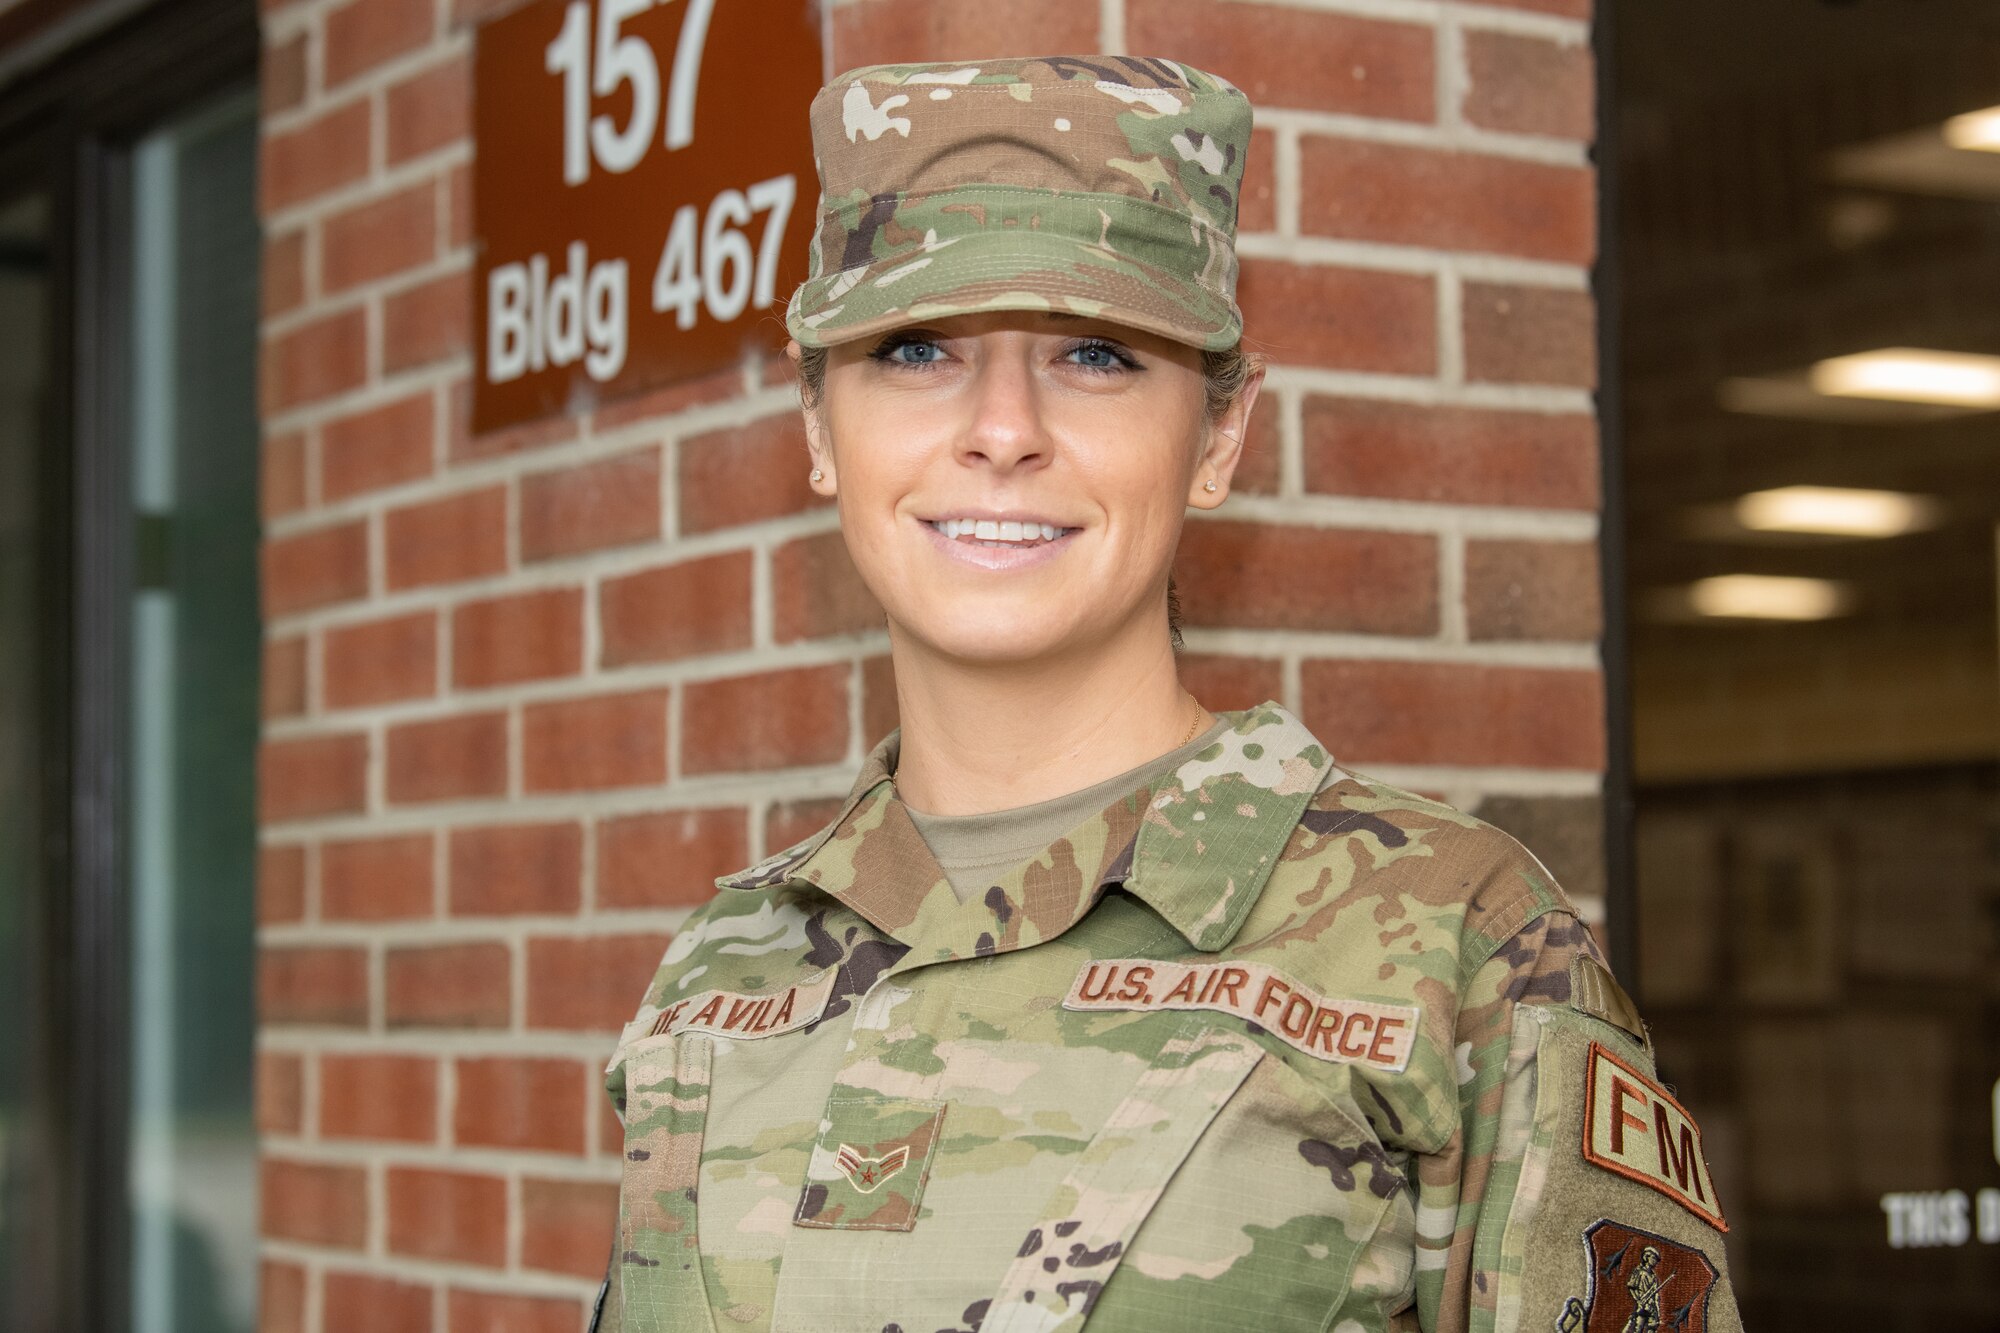 Airman posing for a photo outside building.